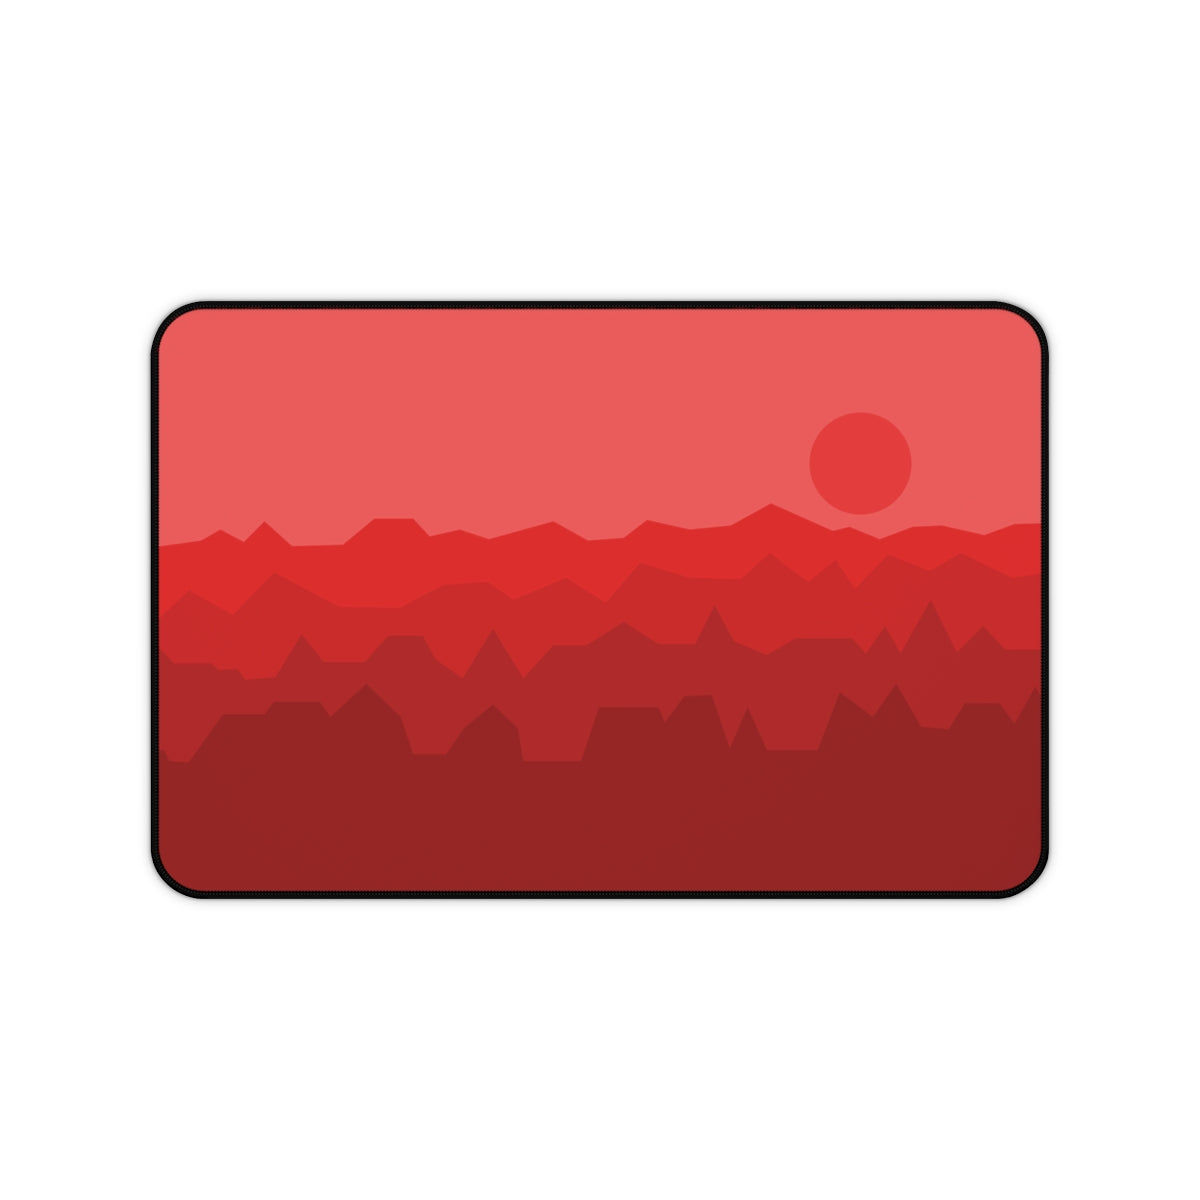 Red Abstract Mountains Desk Mat - Desk Cookies